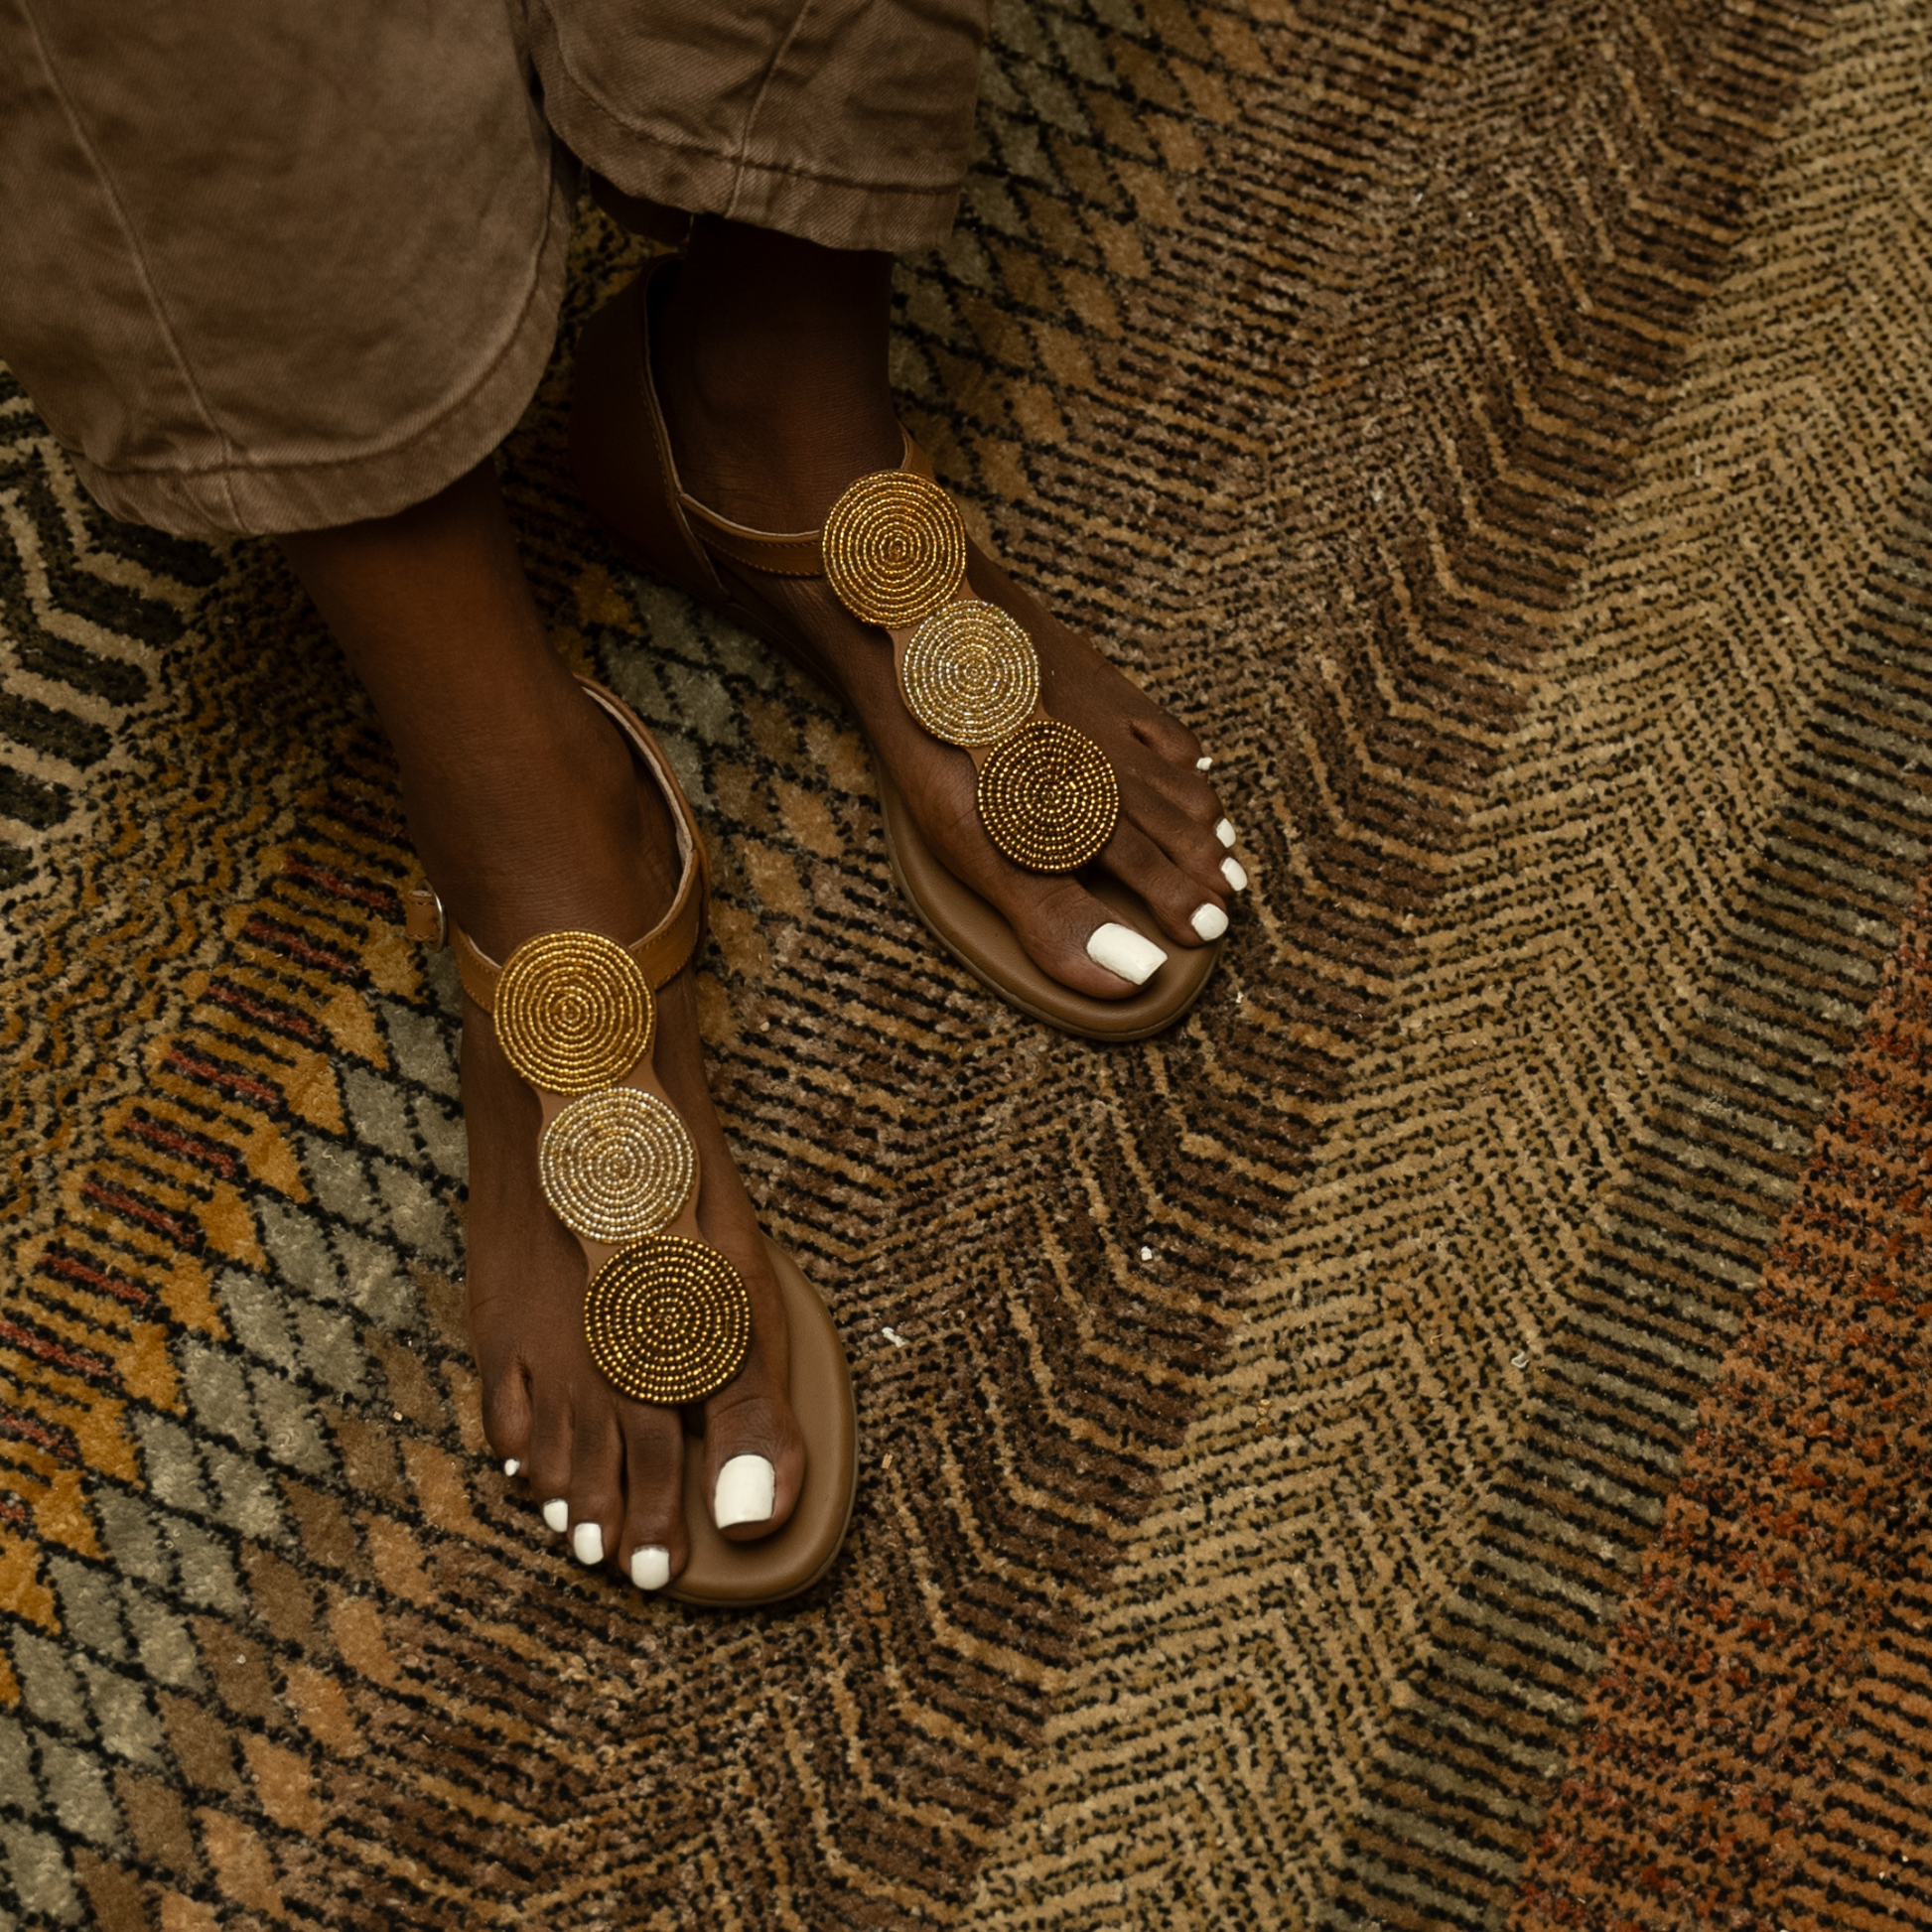 Khadija sandals made with honey smooth leather, beaded upper strap and comfort sole.